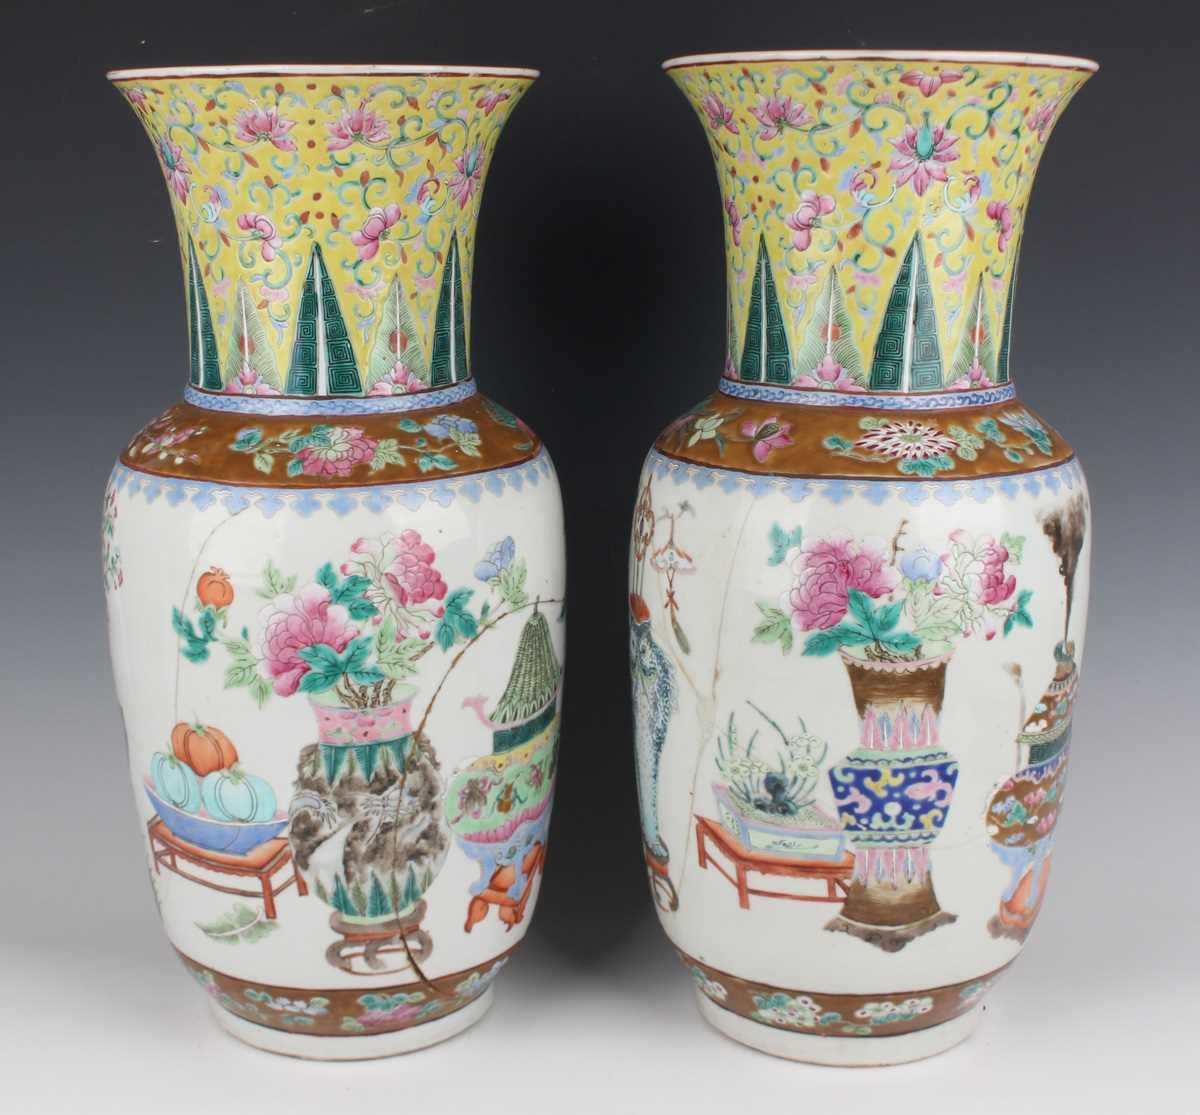 A pair of Chinese famille rose porcelain vases, late 19th century, each swollen cylindrical body